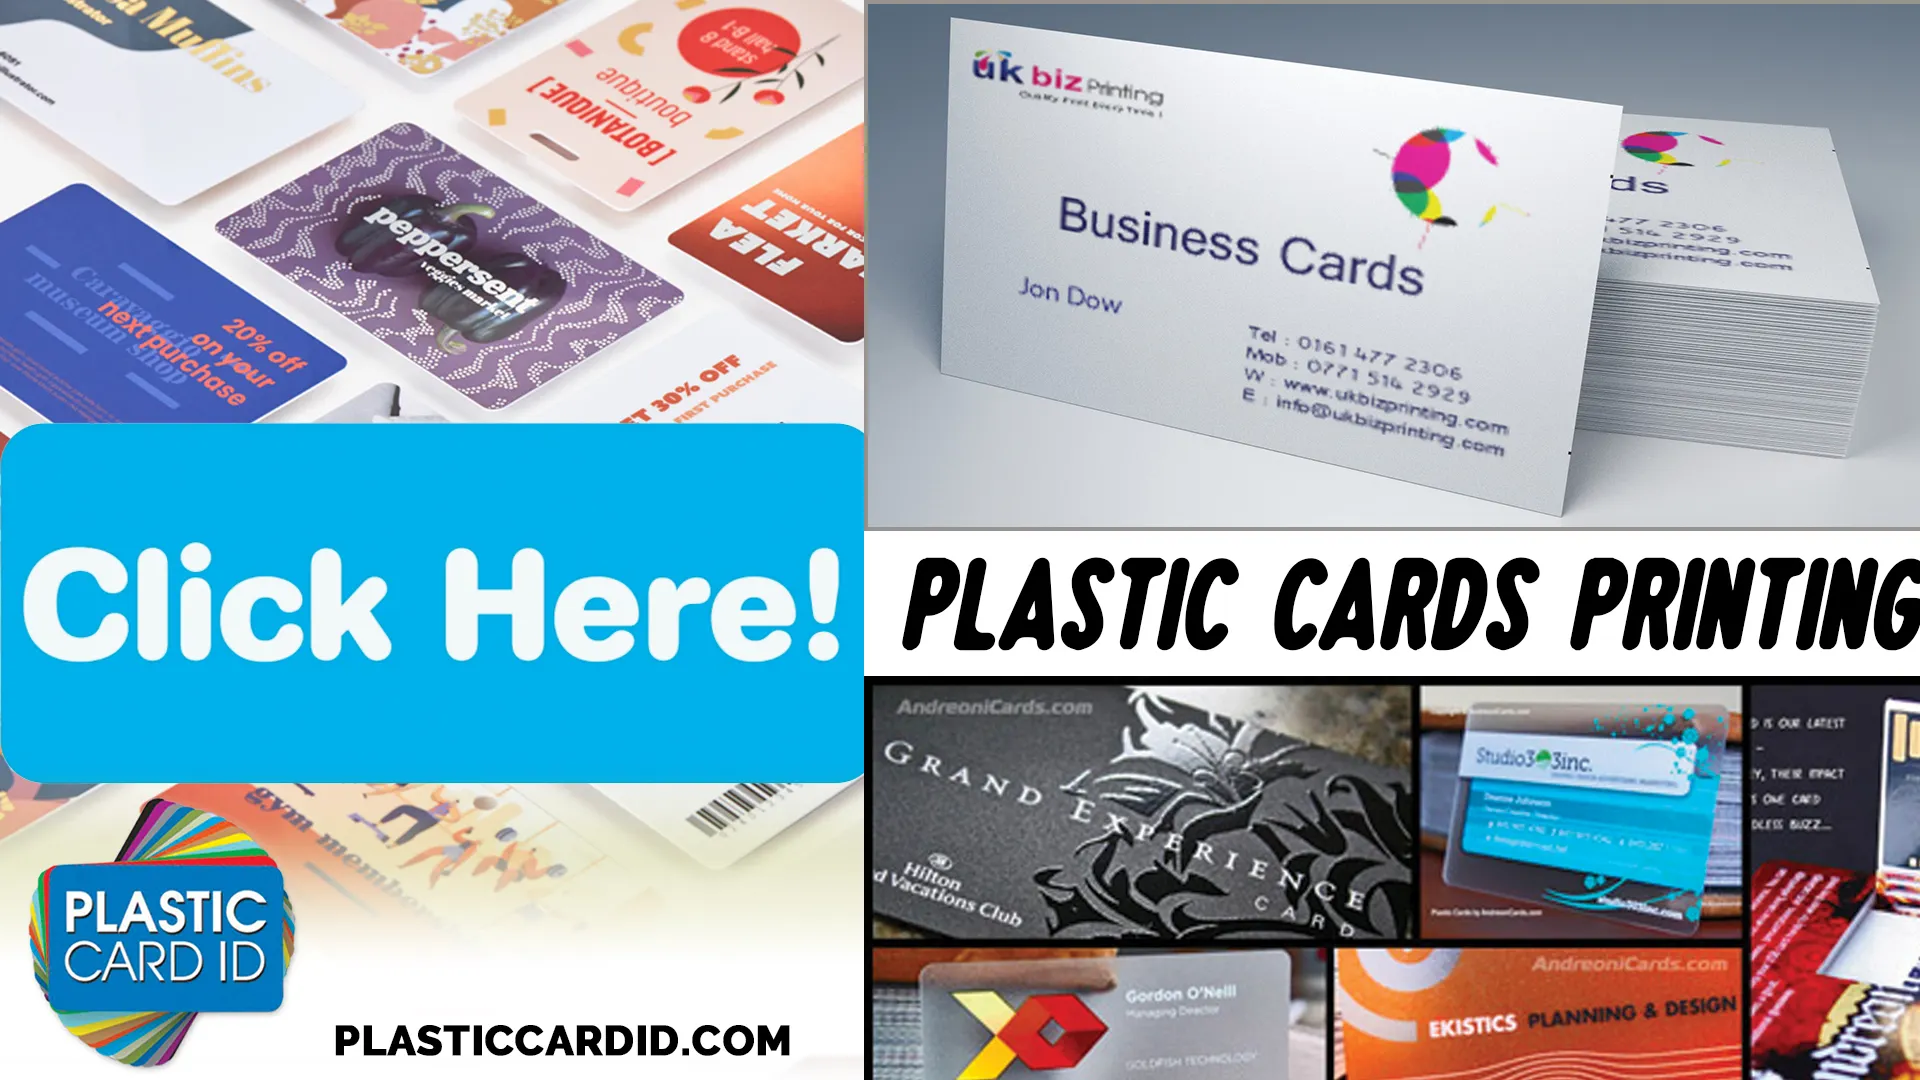 Your One-Stop Shop for Card Printing Needs